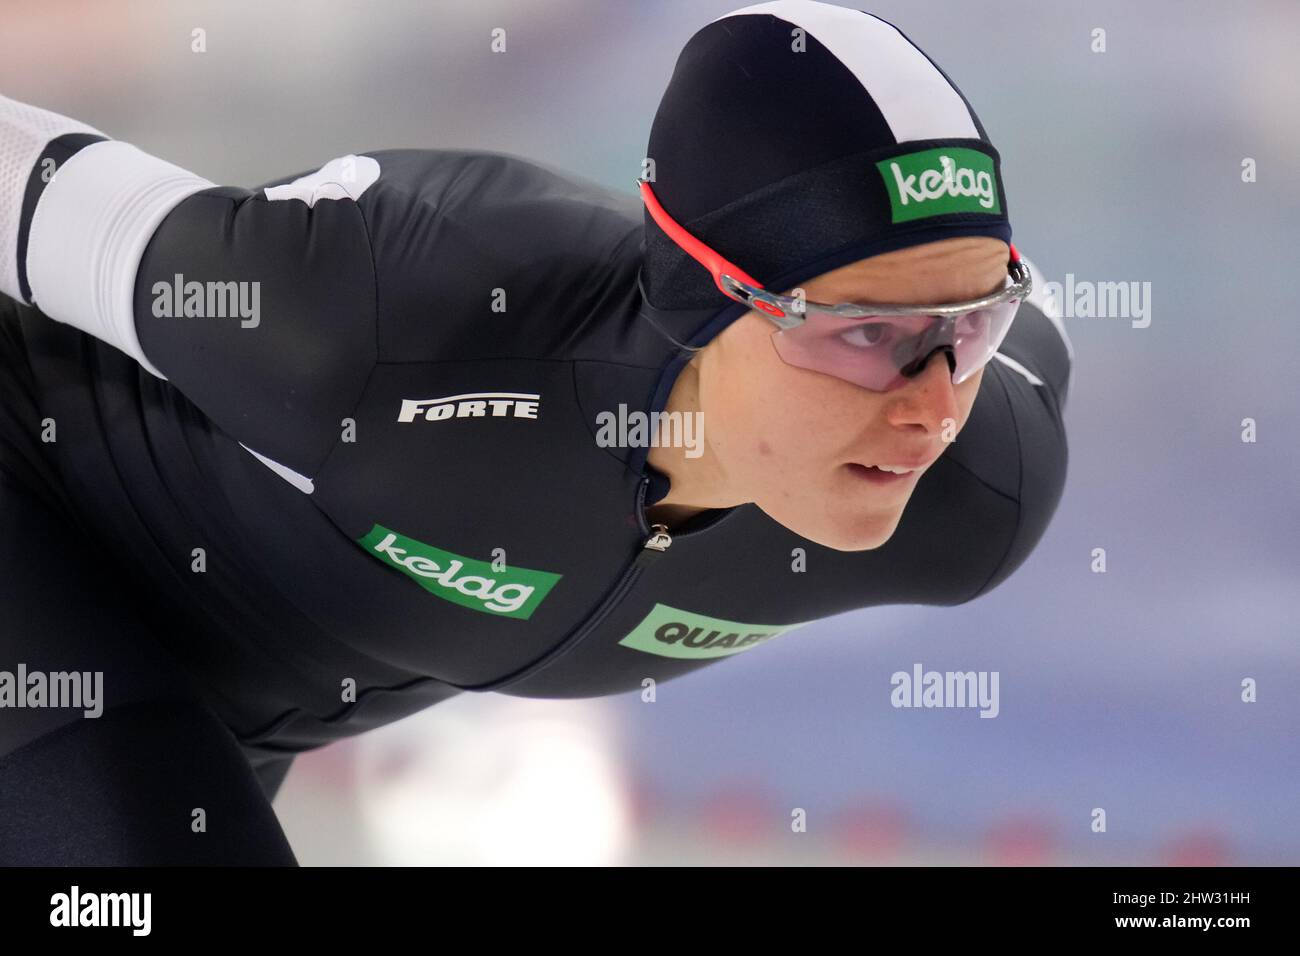 HAMAR, NORWAY - MARCH 3: Vanessa Herzog of Austria competing in the Women's 1000m during the ISU World Speed Skating Championships Sprint at the Vikingskipet on March 3, 2022 in Hamar, Norway (Photo by Douwe Bijlsma/Orange Pictures) Stock Photo